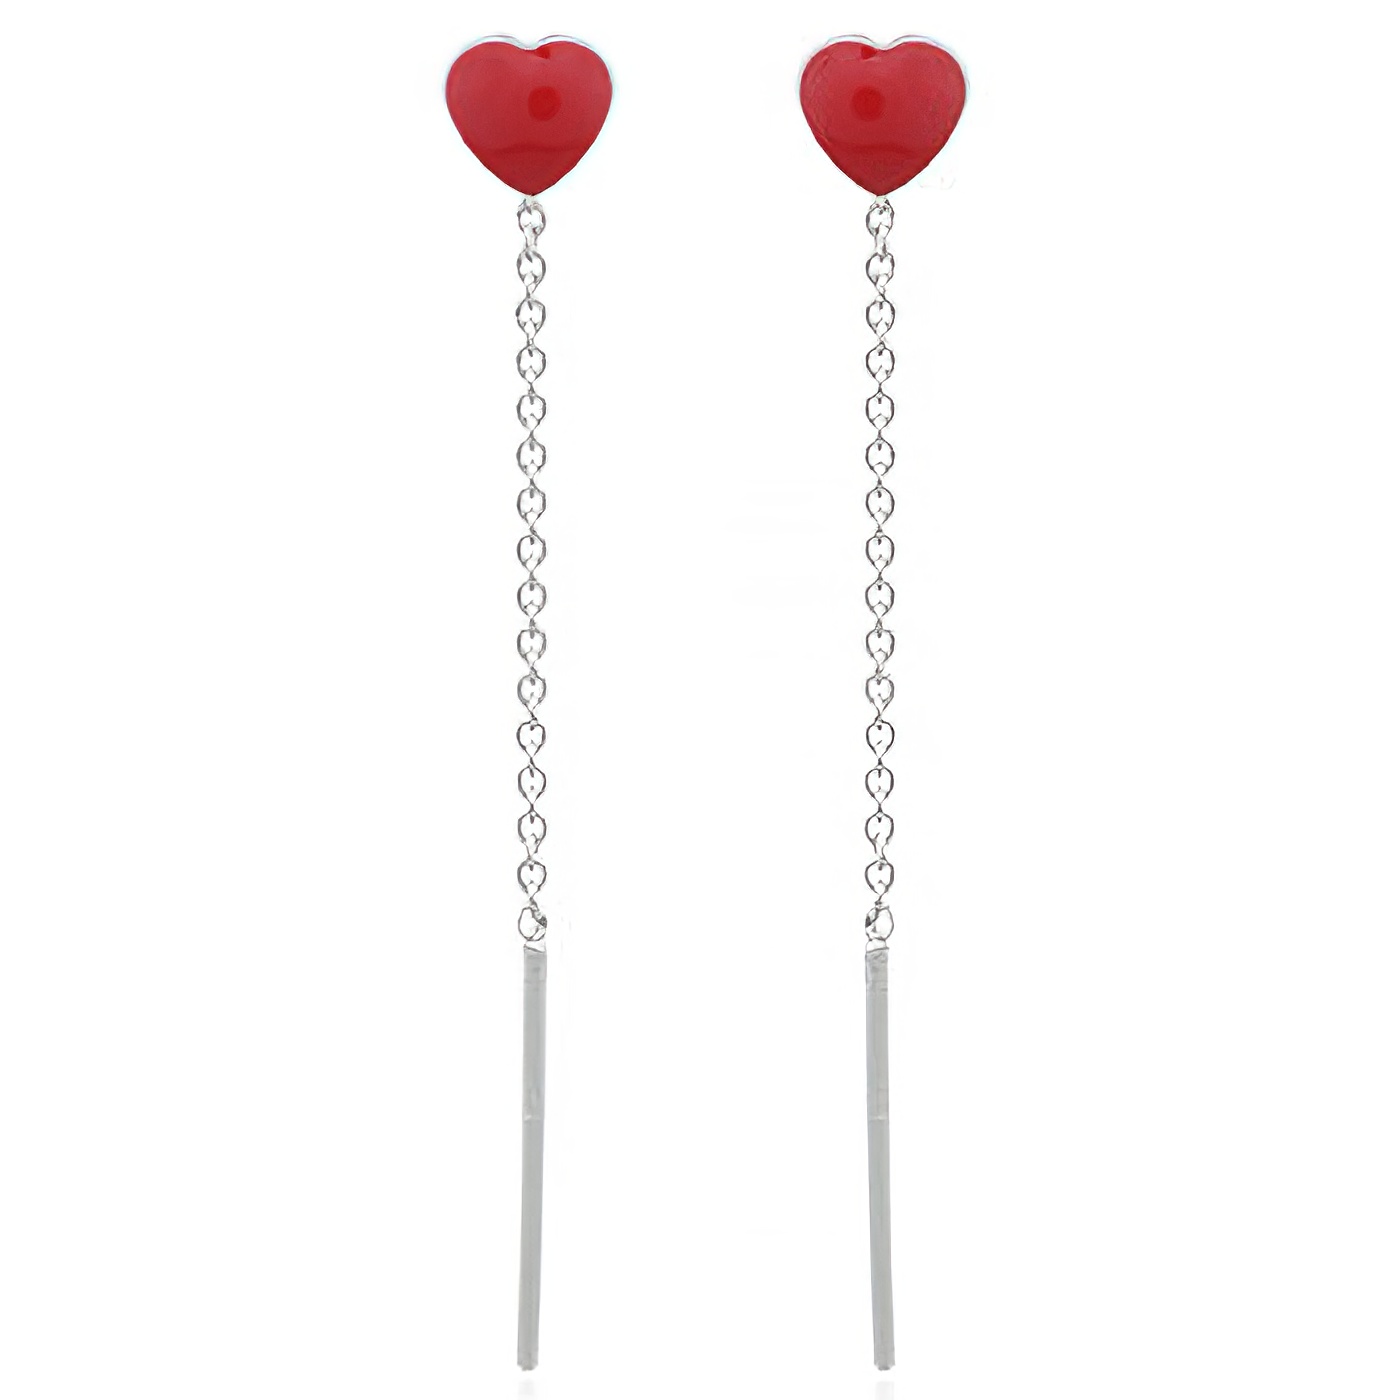 Reconstituted Stone Red Heart 925 Silver Threader Earrings by BeYindi 